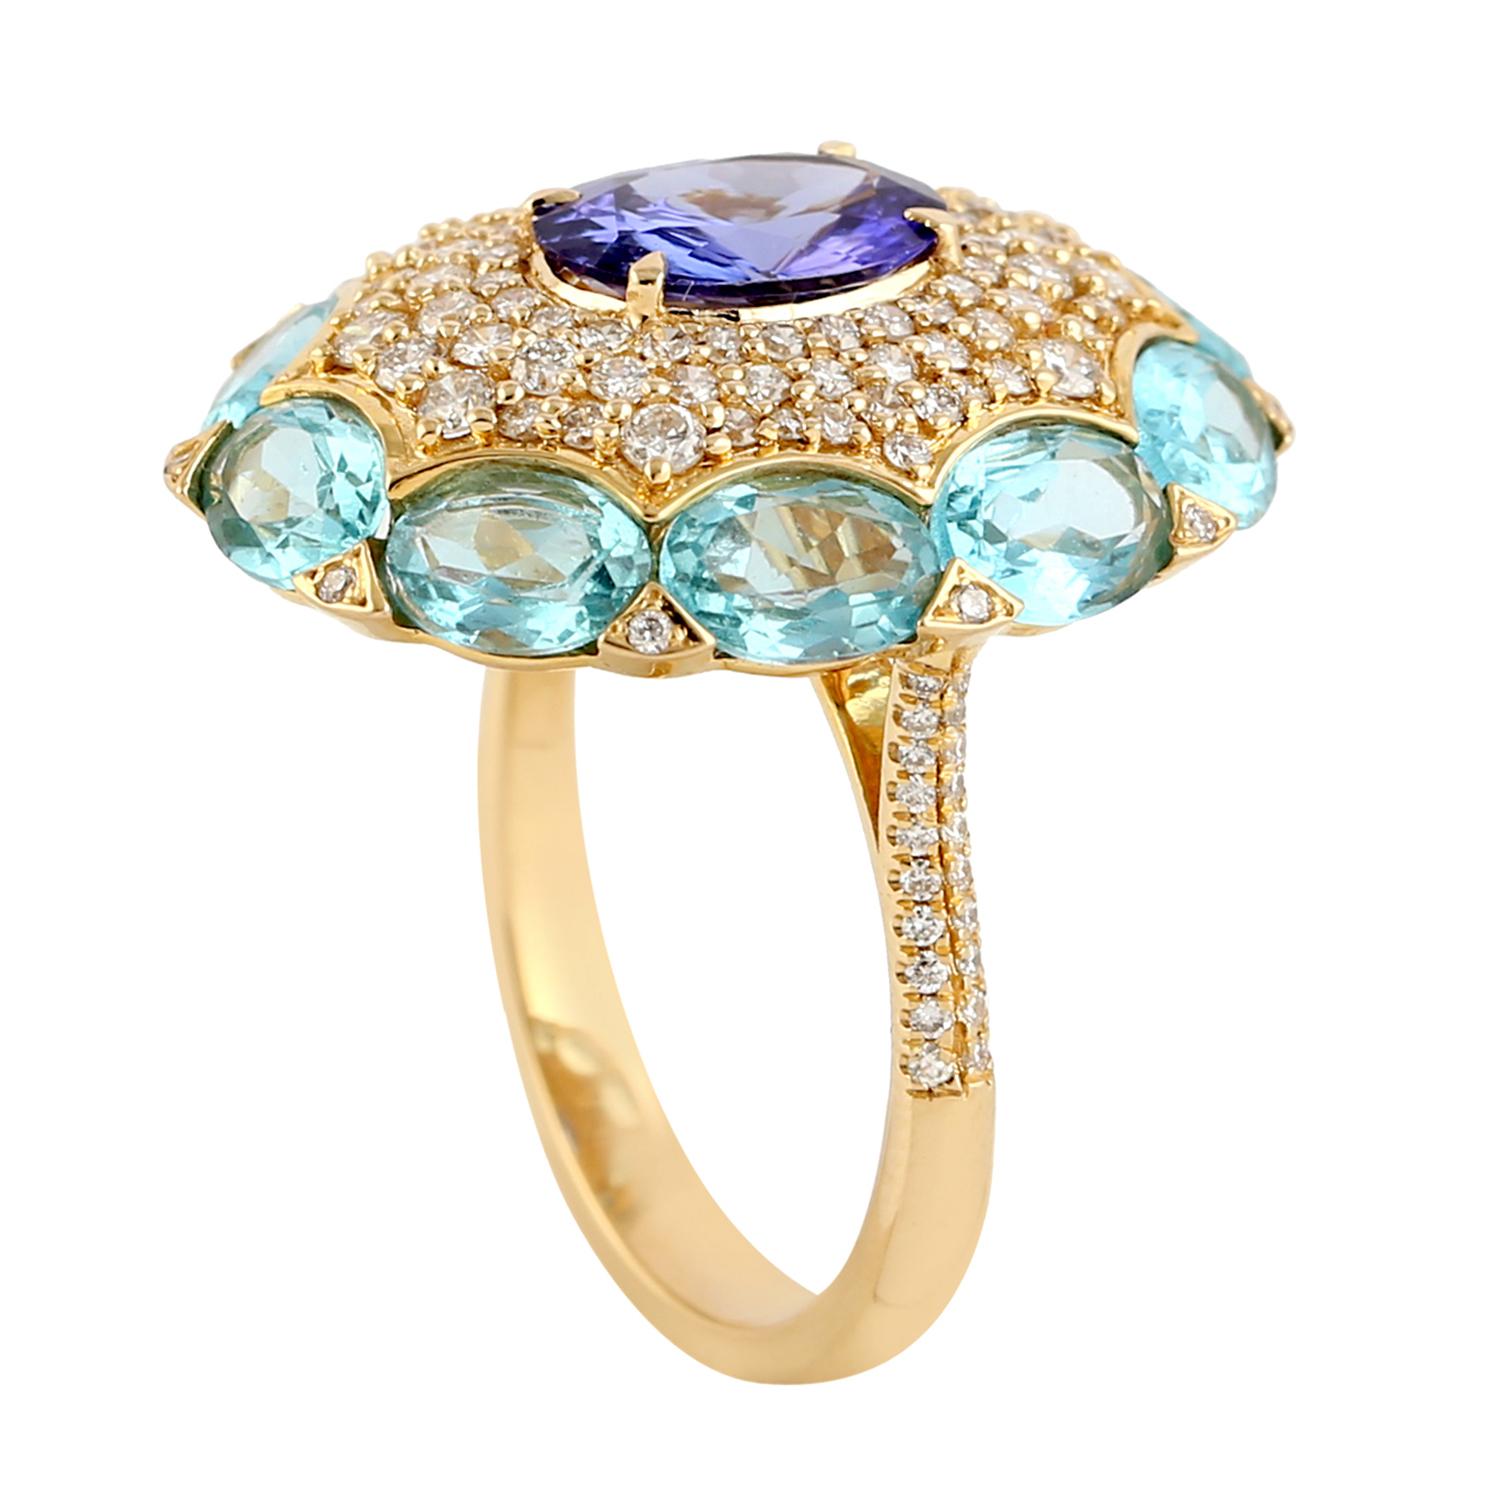 Contemporary Apatite & Tanzanite Cocktail Ring With Diamonds Made In 18k Yellow Gold For Sale